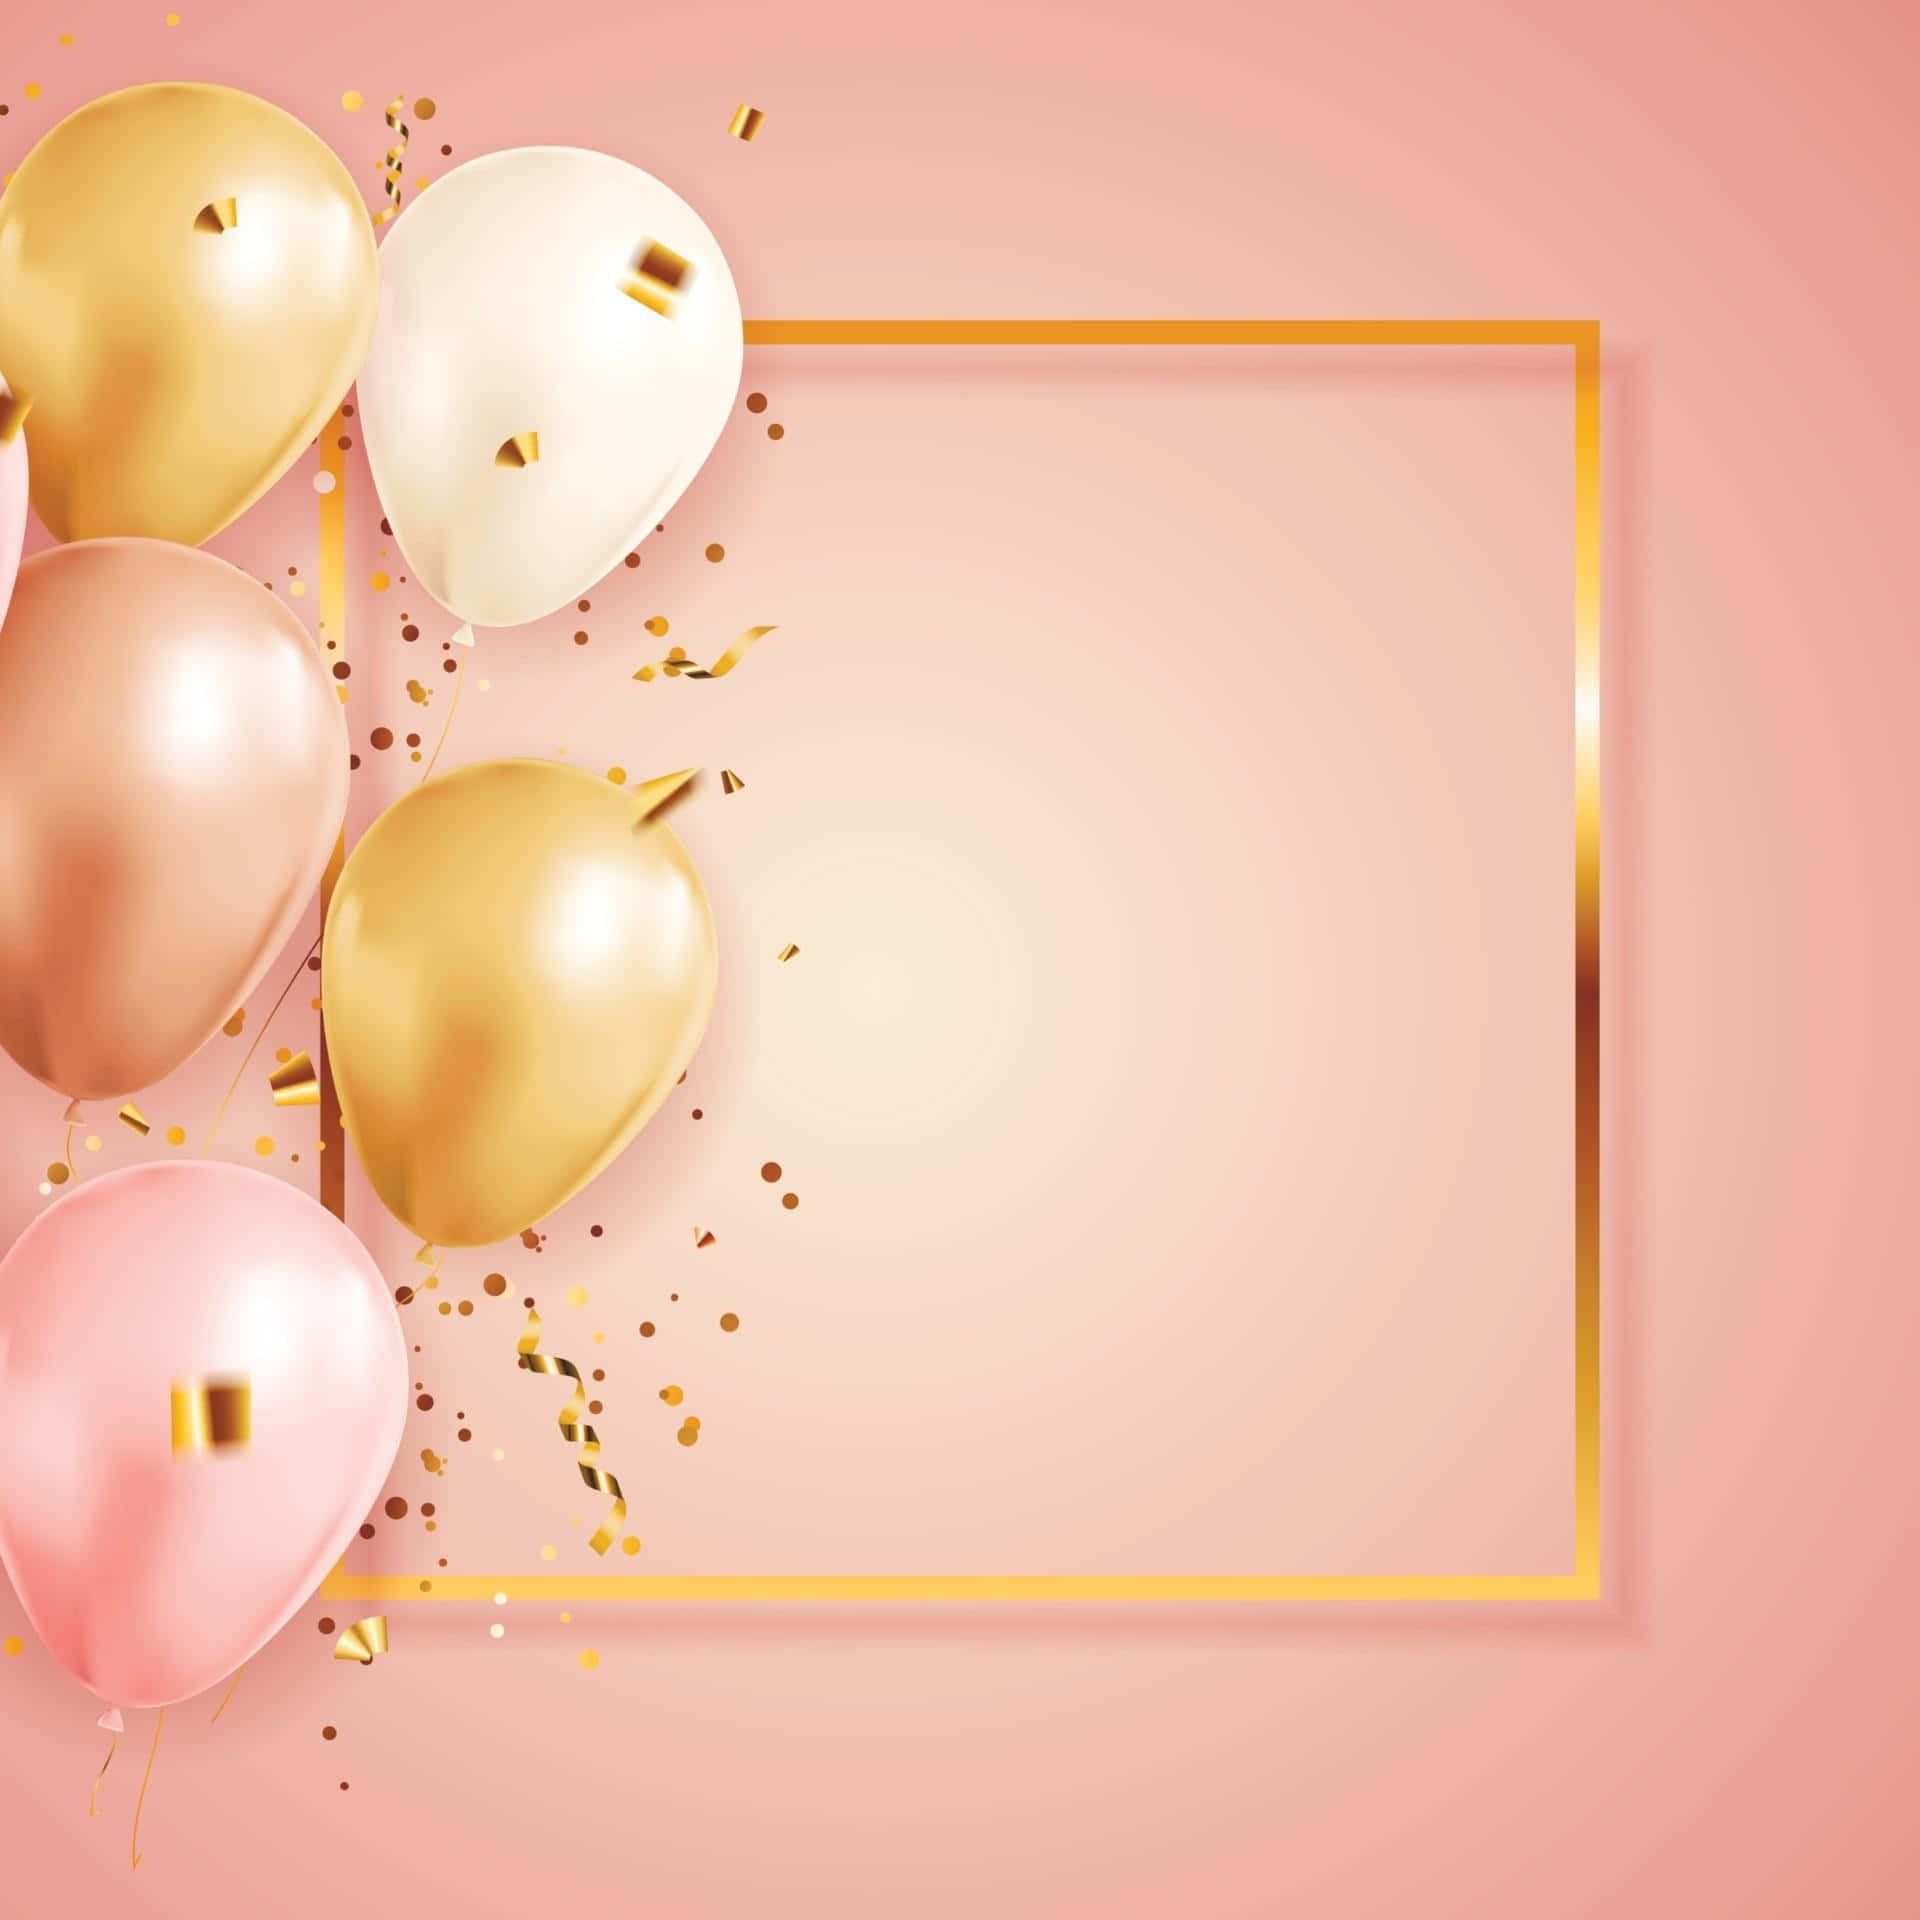 A pink background with a gold square frame and pink and gold balloons - Balloons